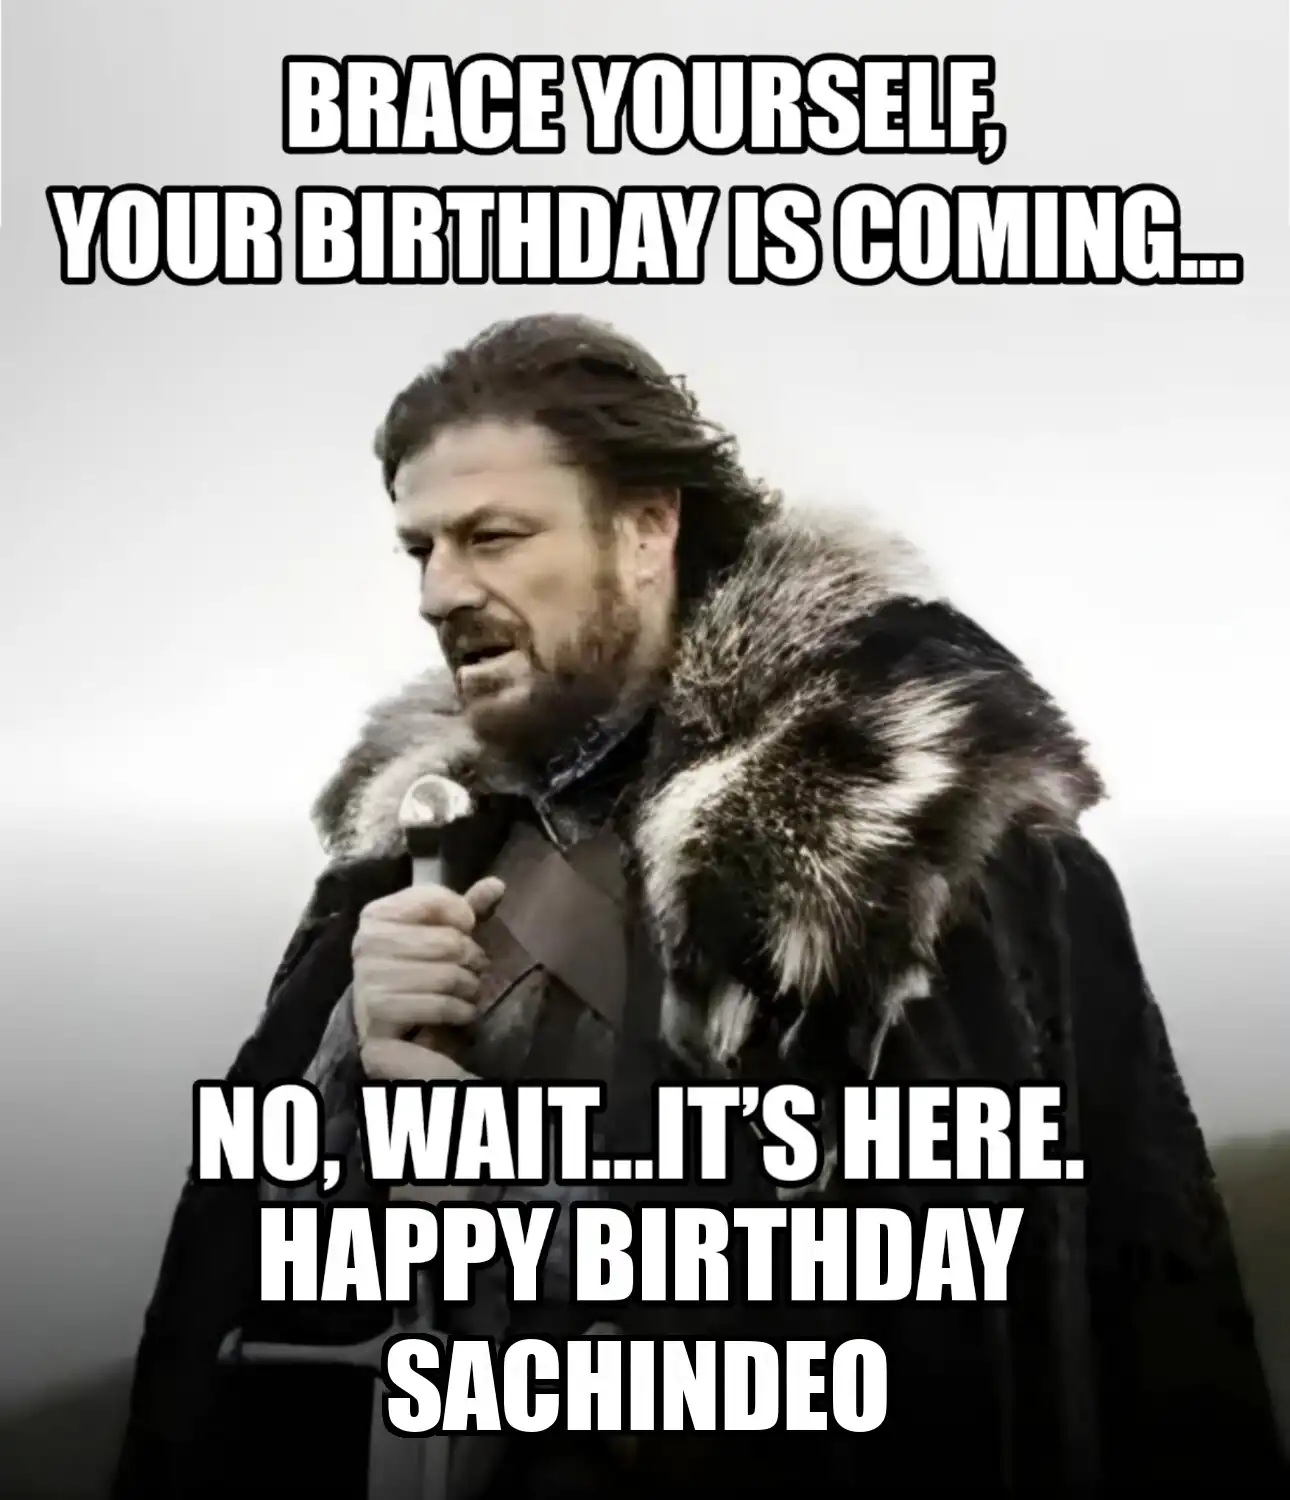 Happy Birthday Sachindeo Brace Yourself Your Birthday Is Coming Meme